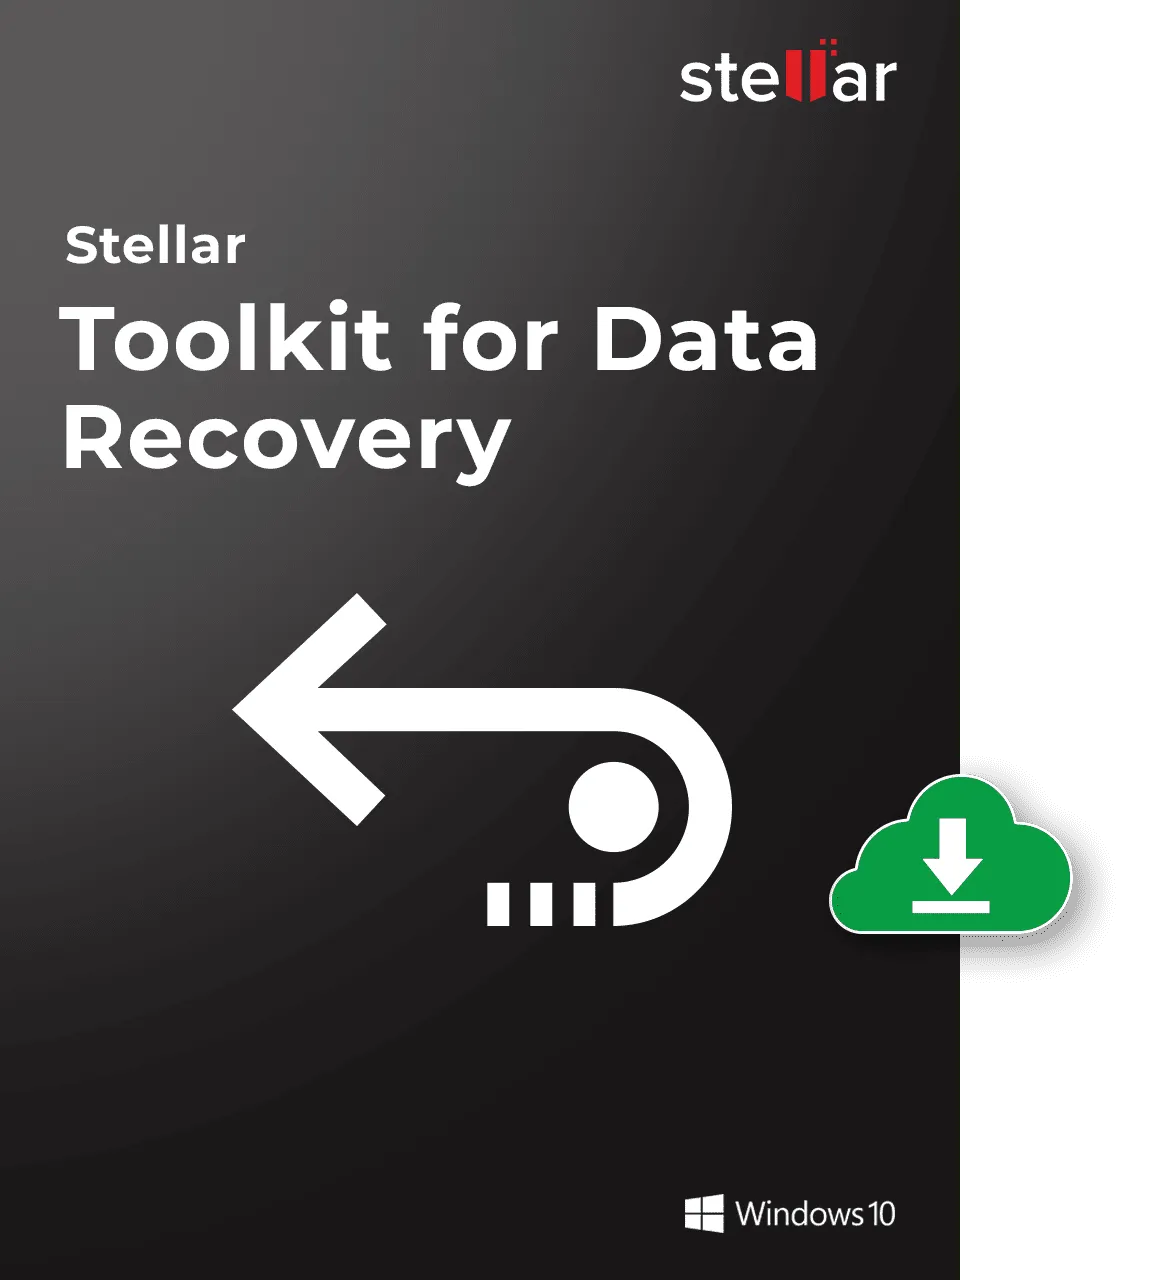  Toolkit for Data Recovery